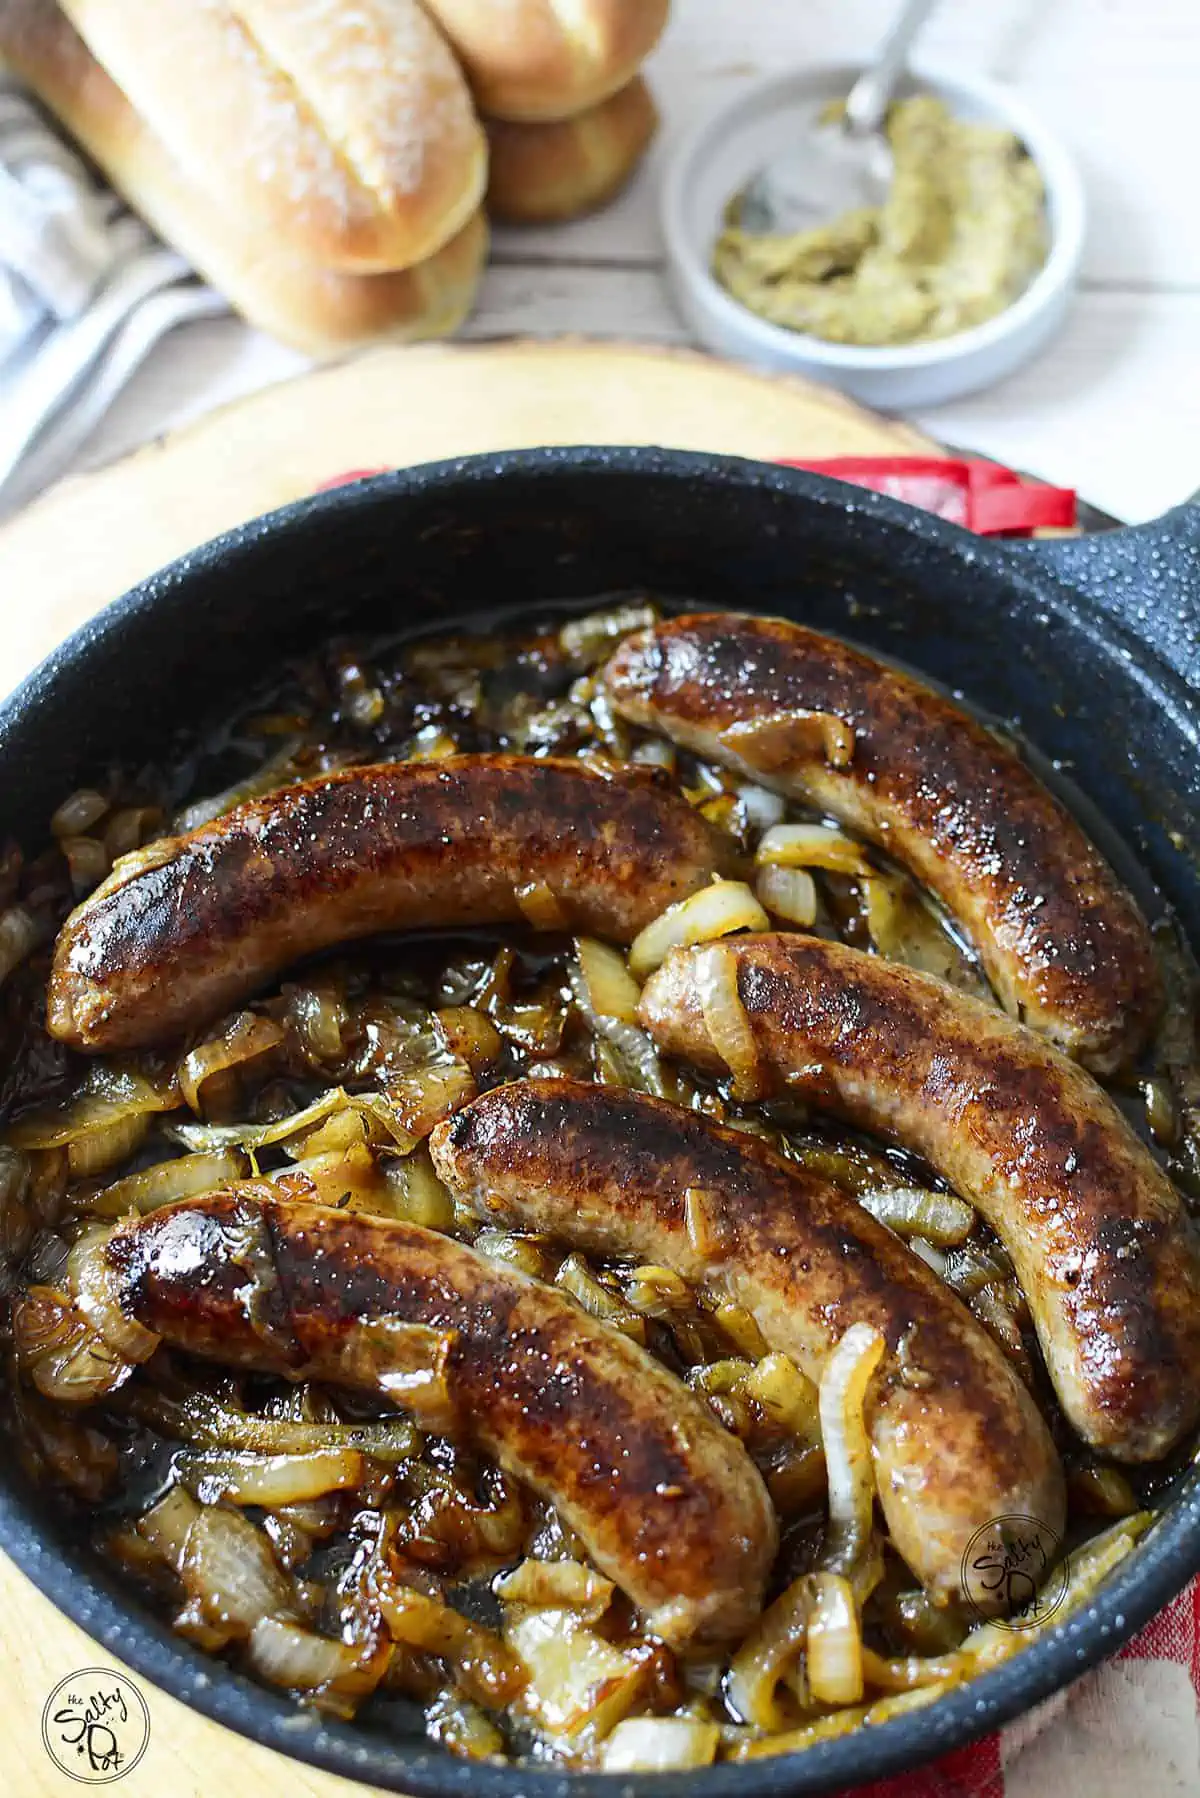 5 bratwurst sausages with onions in a cast iron skillet.